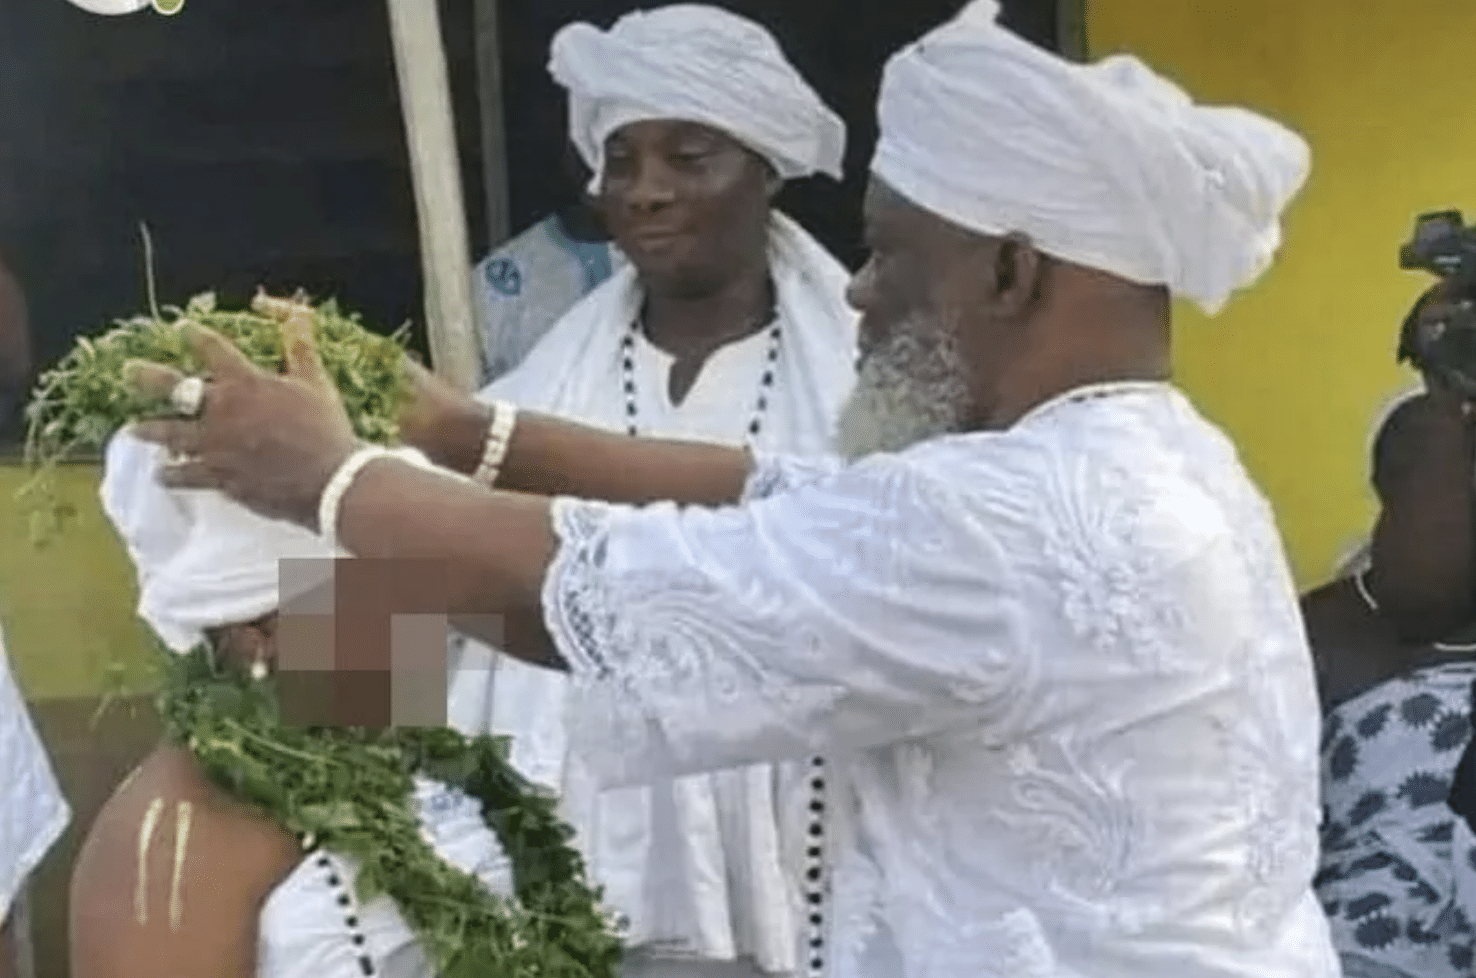 63-year-old priest marries 12-year-old girl after selecting young bride when she was just six